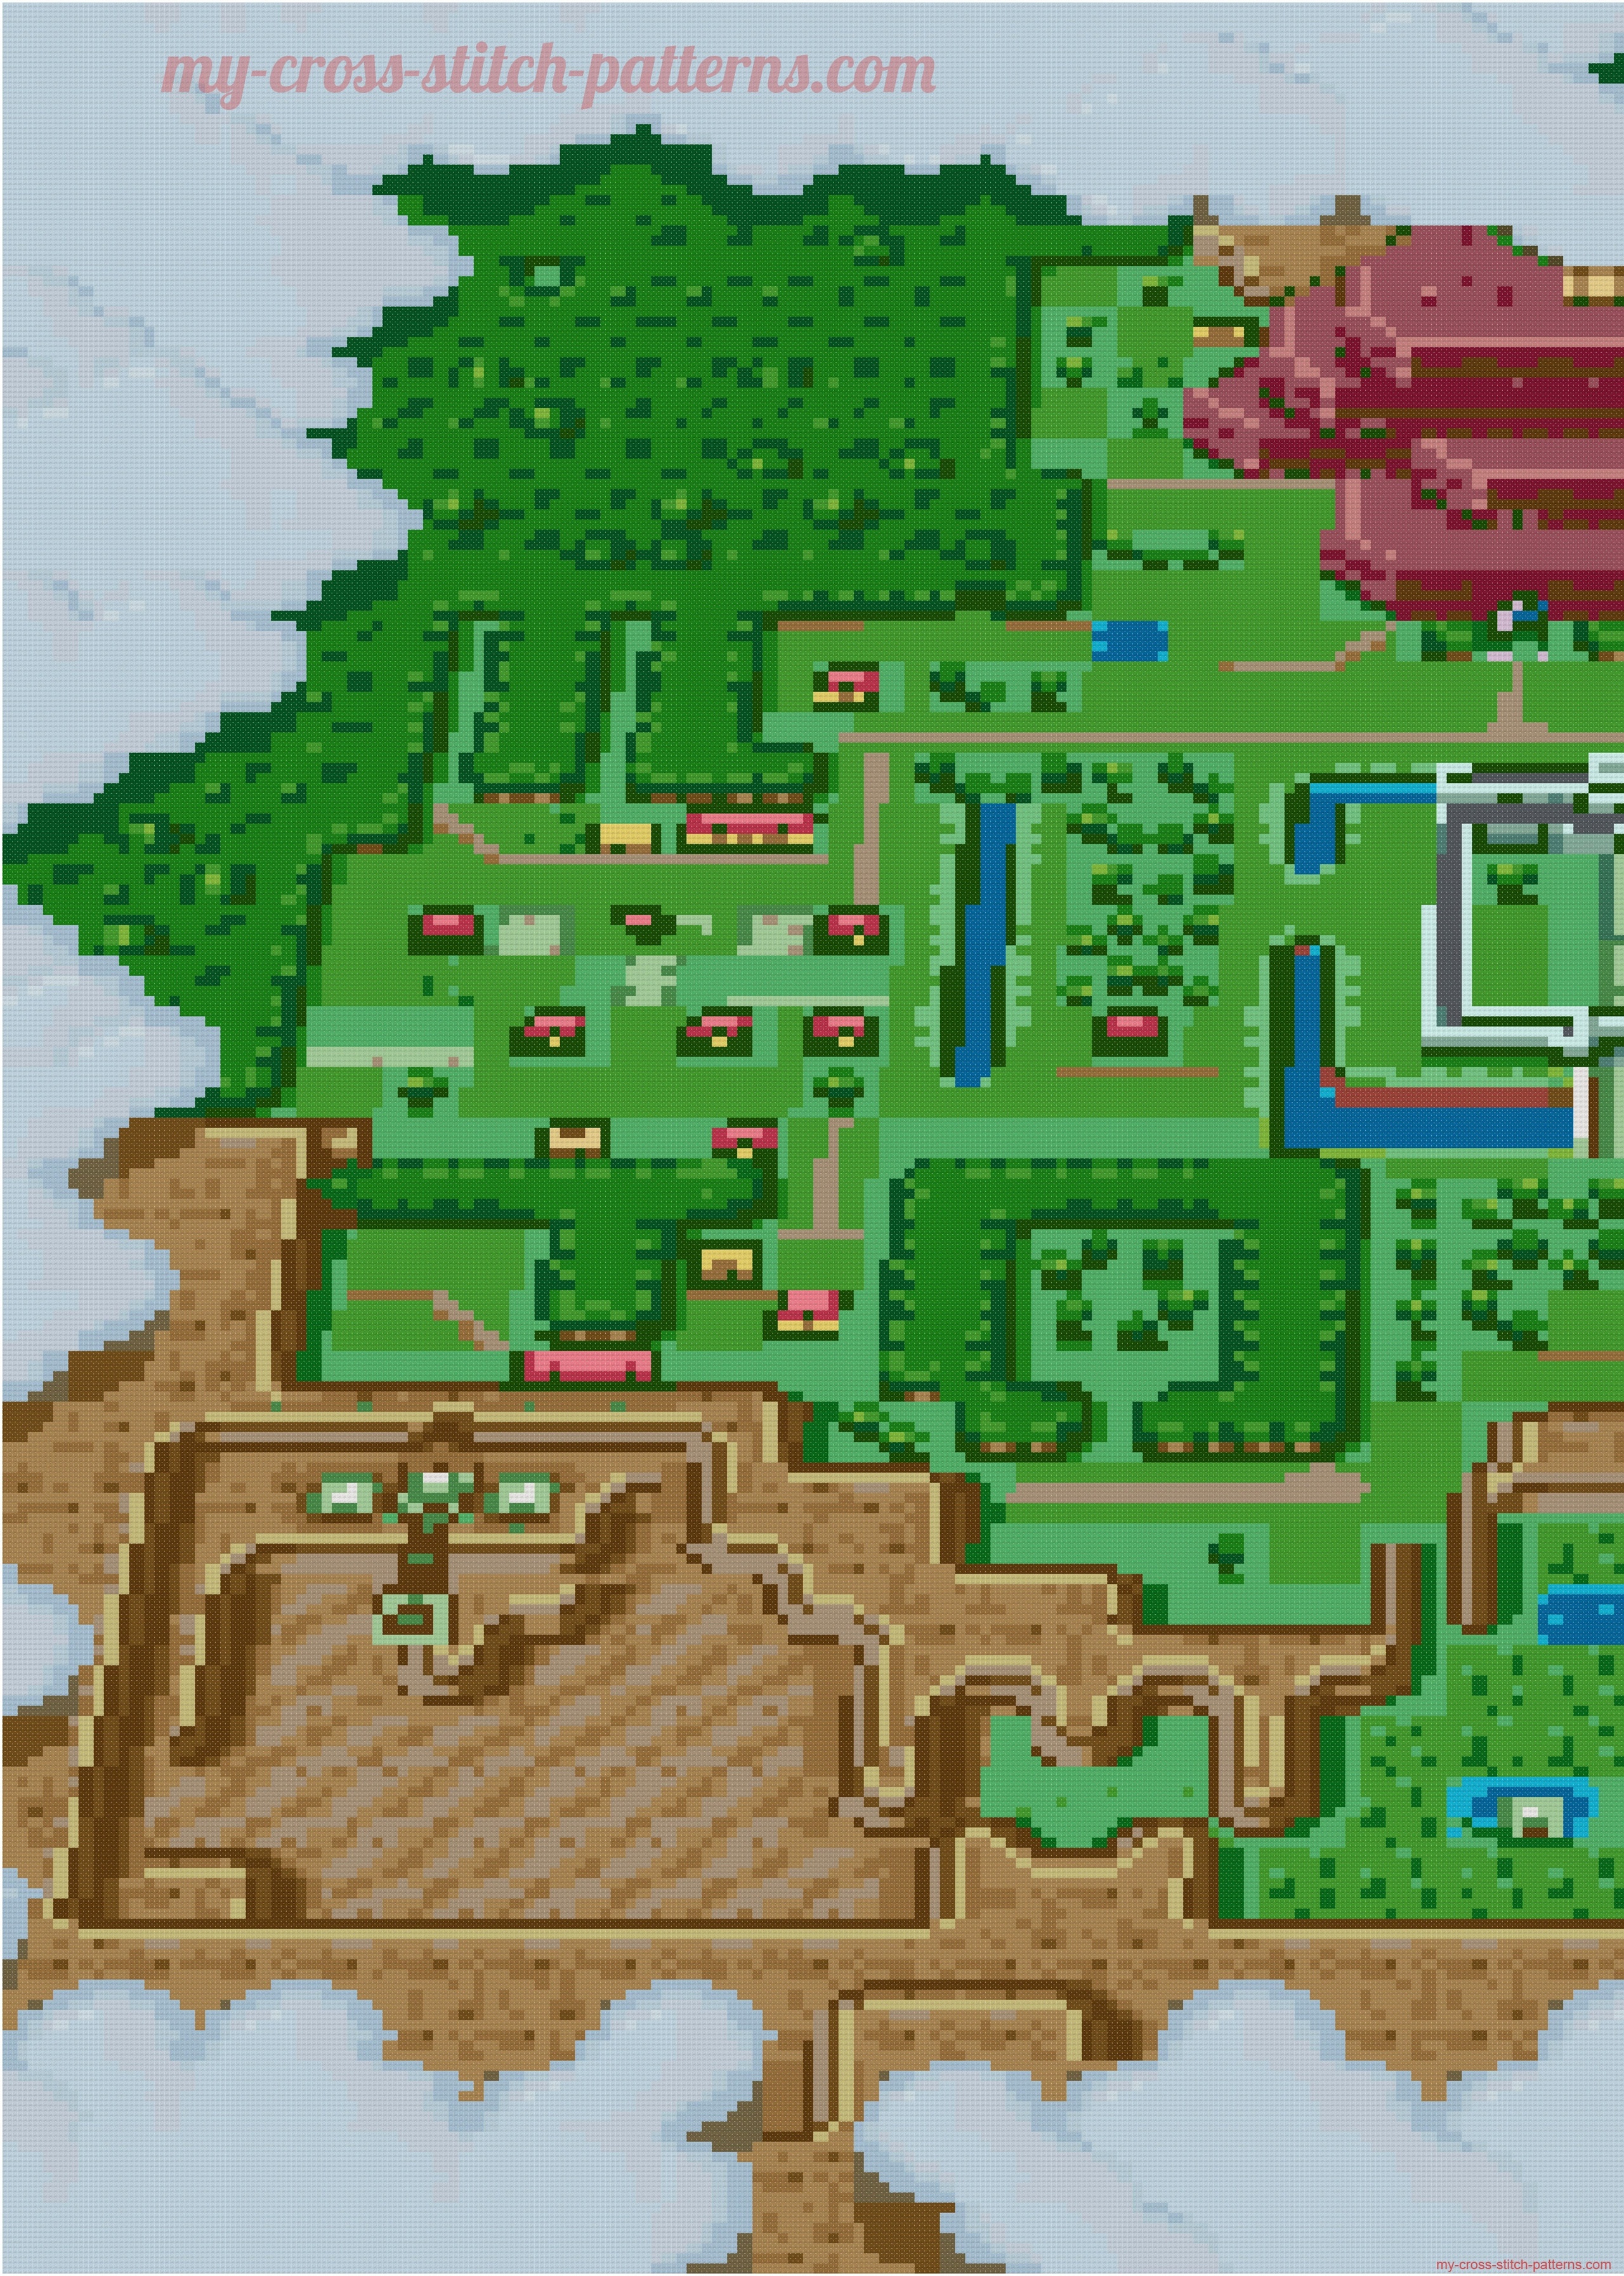 the_legend_of_zelda_a_link_to_the_past_map_cross_stitch_pattern_3